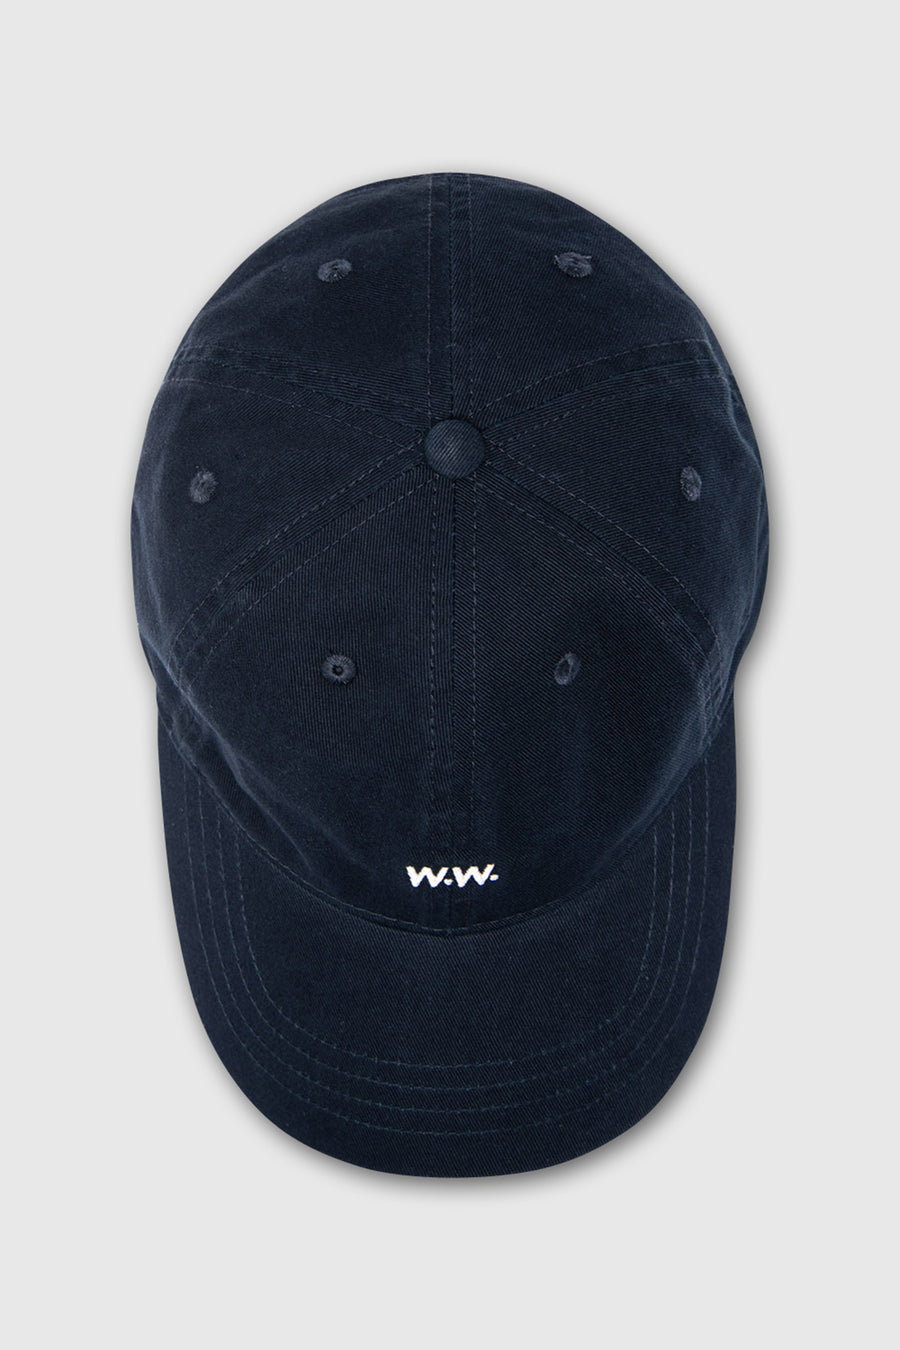 Low Profile Twill Cap Navy OS